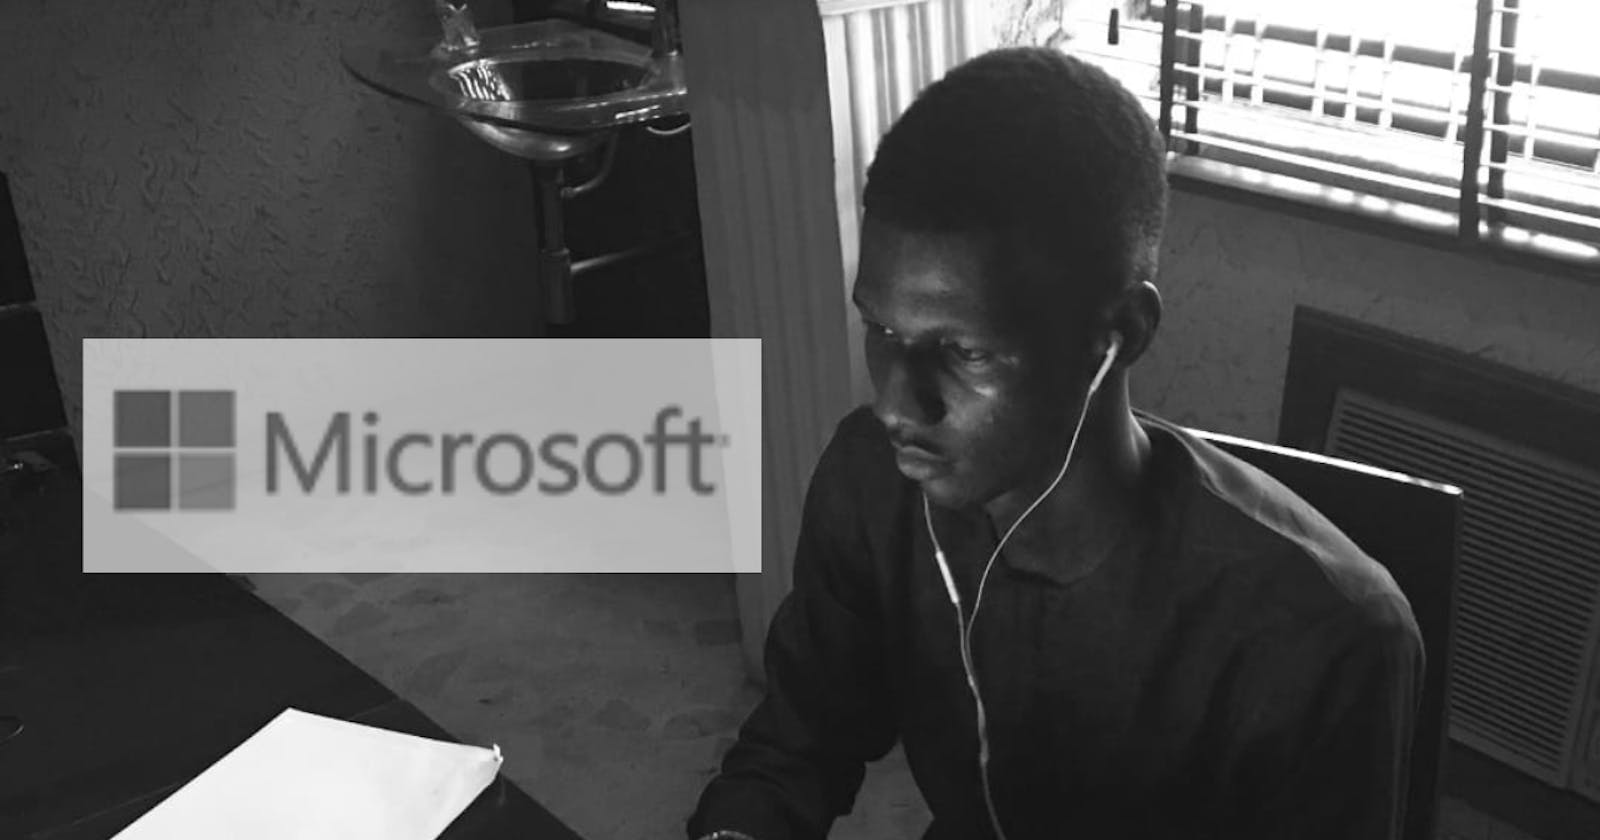 One line of code at a time: Inspired by Microsoft